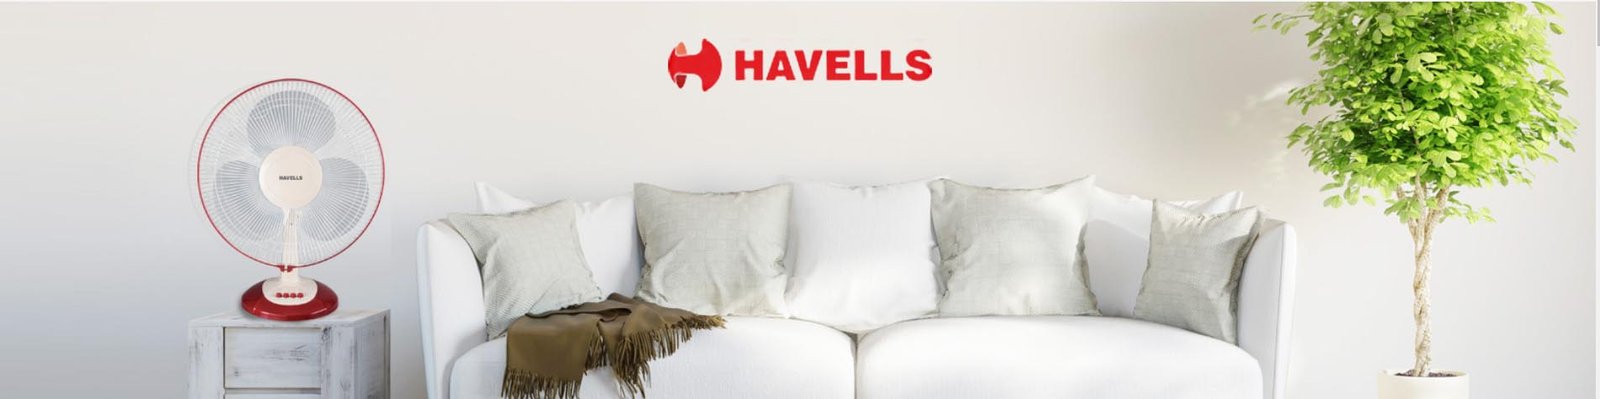 Havells Table Fan Banner